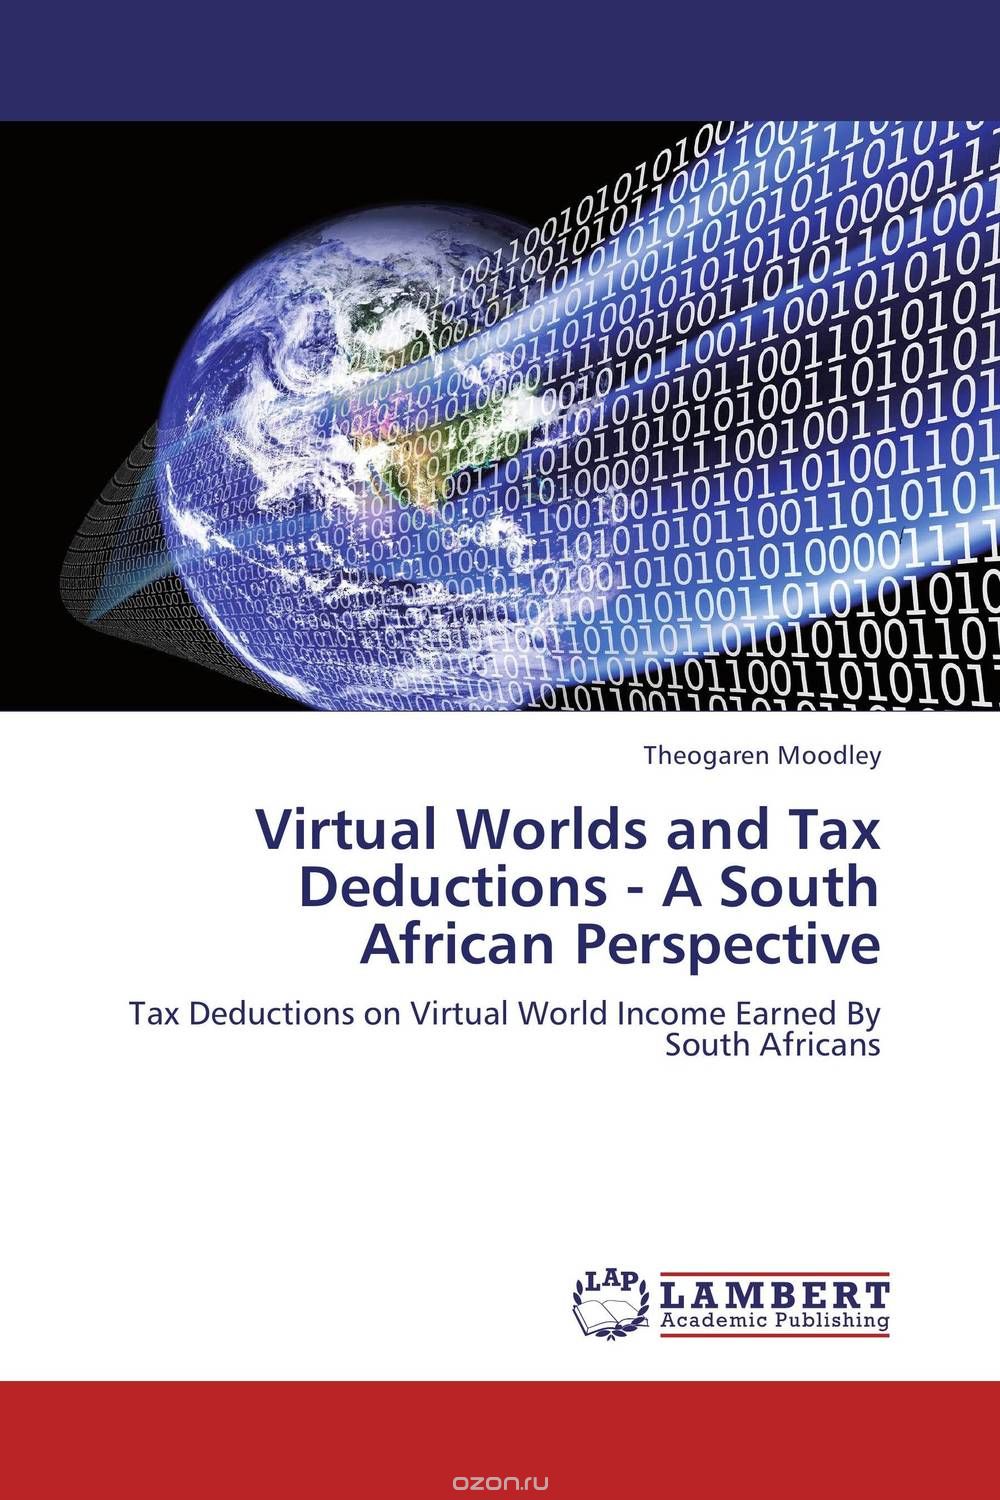 Скачать книгу "Virtual Worlds and Tax Deductions - A South African Perspective"